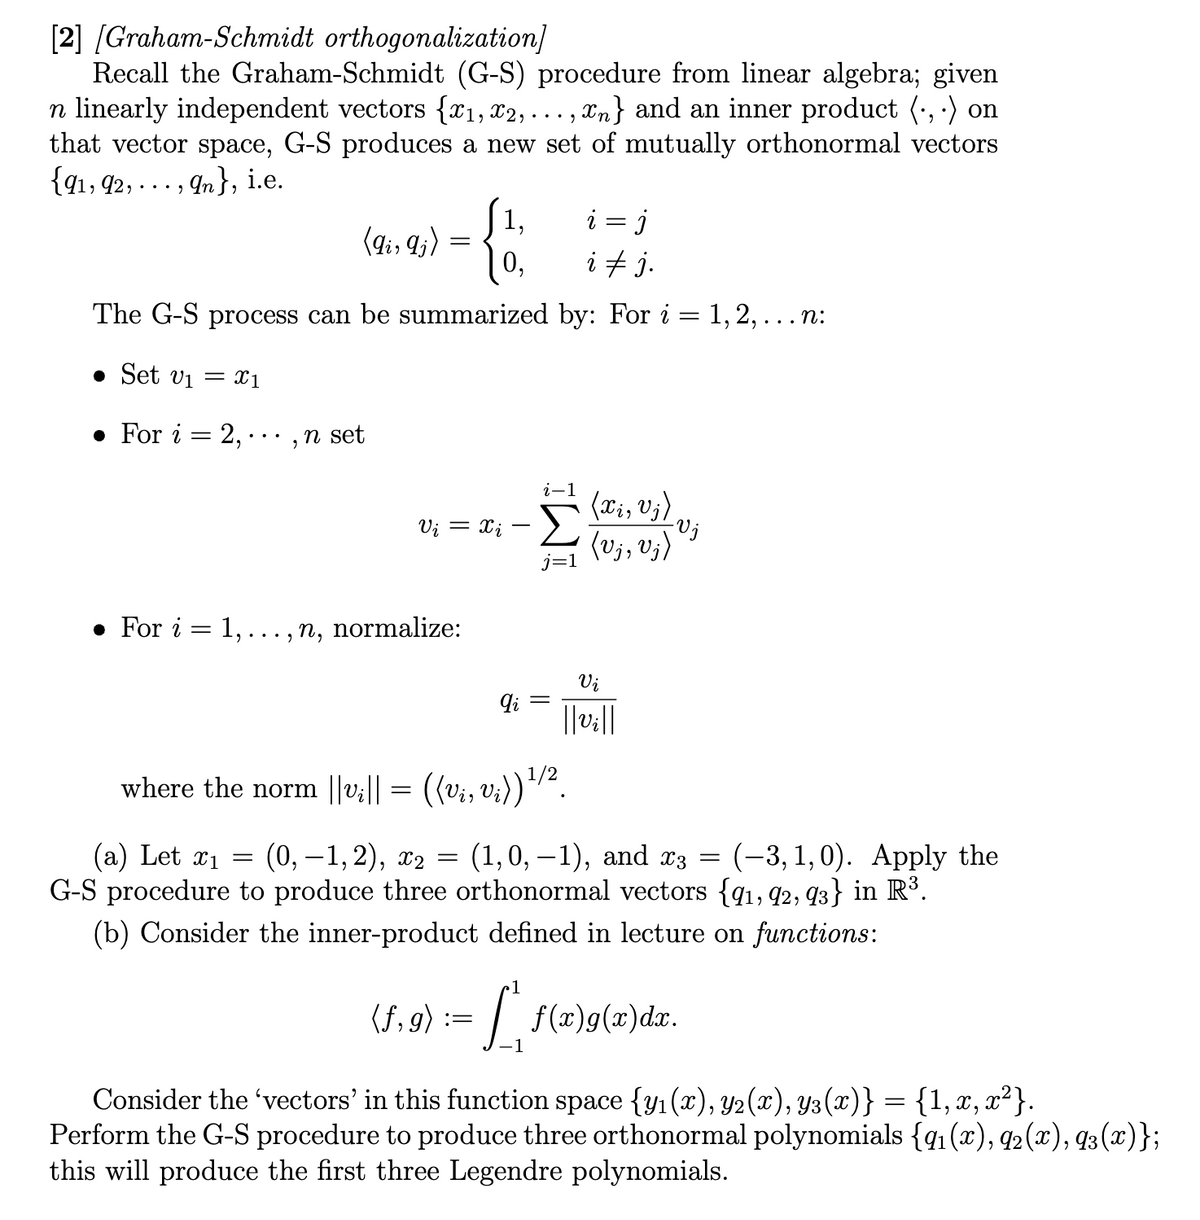 [2] [Graham-Schmidt orthogonalization]
Recall the Graham-Schmidt (G-S) procedure from linear algebra; given
n linearly independent vectors {x₁, x2,...,n} and an inner product (...) on
that vector space, G-S produces a new set of mutually orthonormal vectors
{91, 92,...,n}, i.e.
i = j
i ‡ j.
The G-S process can be summarized by: For i = 1, 2, . . . n:
• Set v₁ = x1
. For i = 2,..., n set
. For i
=
2
(9i, 9j) =
i-1
Ui = Xi -Σ
j=1
.., n, normalize:
1,
0,
(f,g):
:=
qi =
where the norm ||v₁|| = ((vi, vi)) ¹/².
(a) Let x₁ = (0,−1, 2), x₂
=
(1,0,−1), and x3 = (-3,1,0). Apply the
G-S procedure to produce three orthonormal vectors {91, 92, 93} in R³.
(b) Consider the inner-product defined in lecture on functions:
(Xi, Vj)
-Vj
(Vj, vj)
[
[f
Vi
||v₂||
f(x)g(x)dx.
Consider the 'vectors' in this function space {y₁ (x), Y2(x), Y3(x)} = {1, x, x²}.
Perform the G-S procedure to produce three orthonormal polynomials {q₁ (x), 92(x), 93 (x)};
this will produce the first three Legendre polynomials.